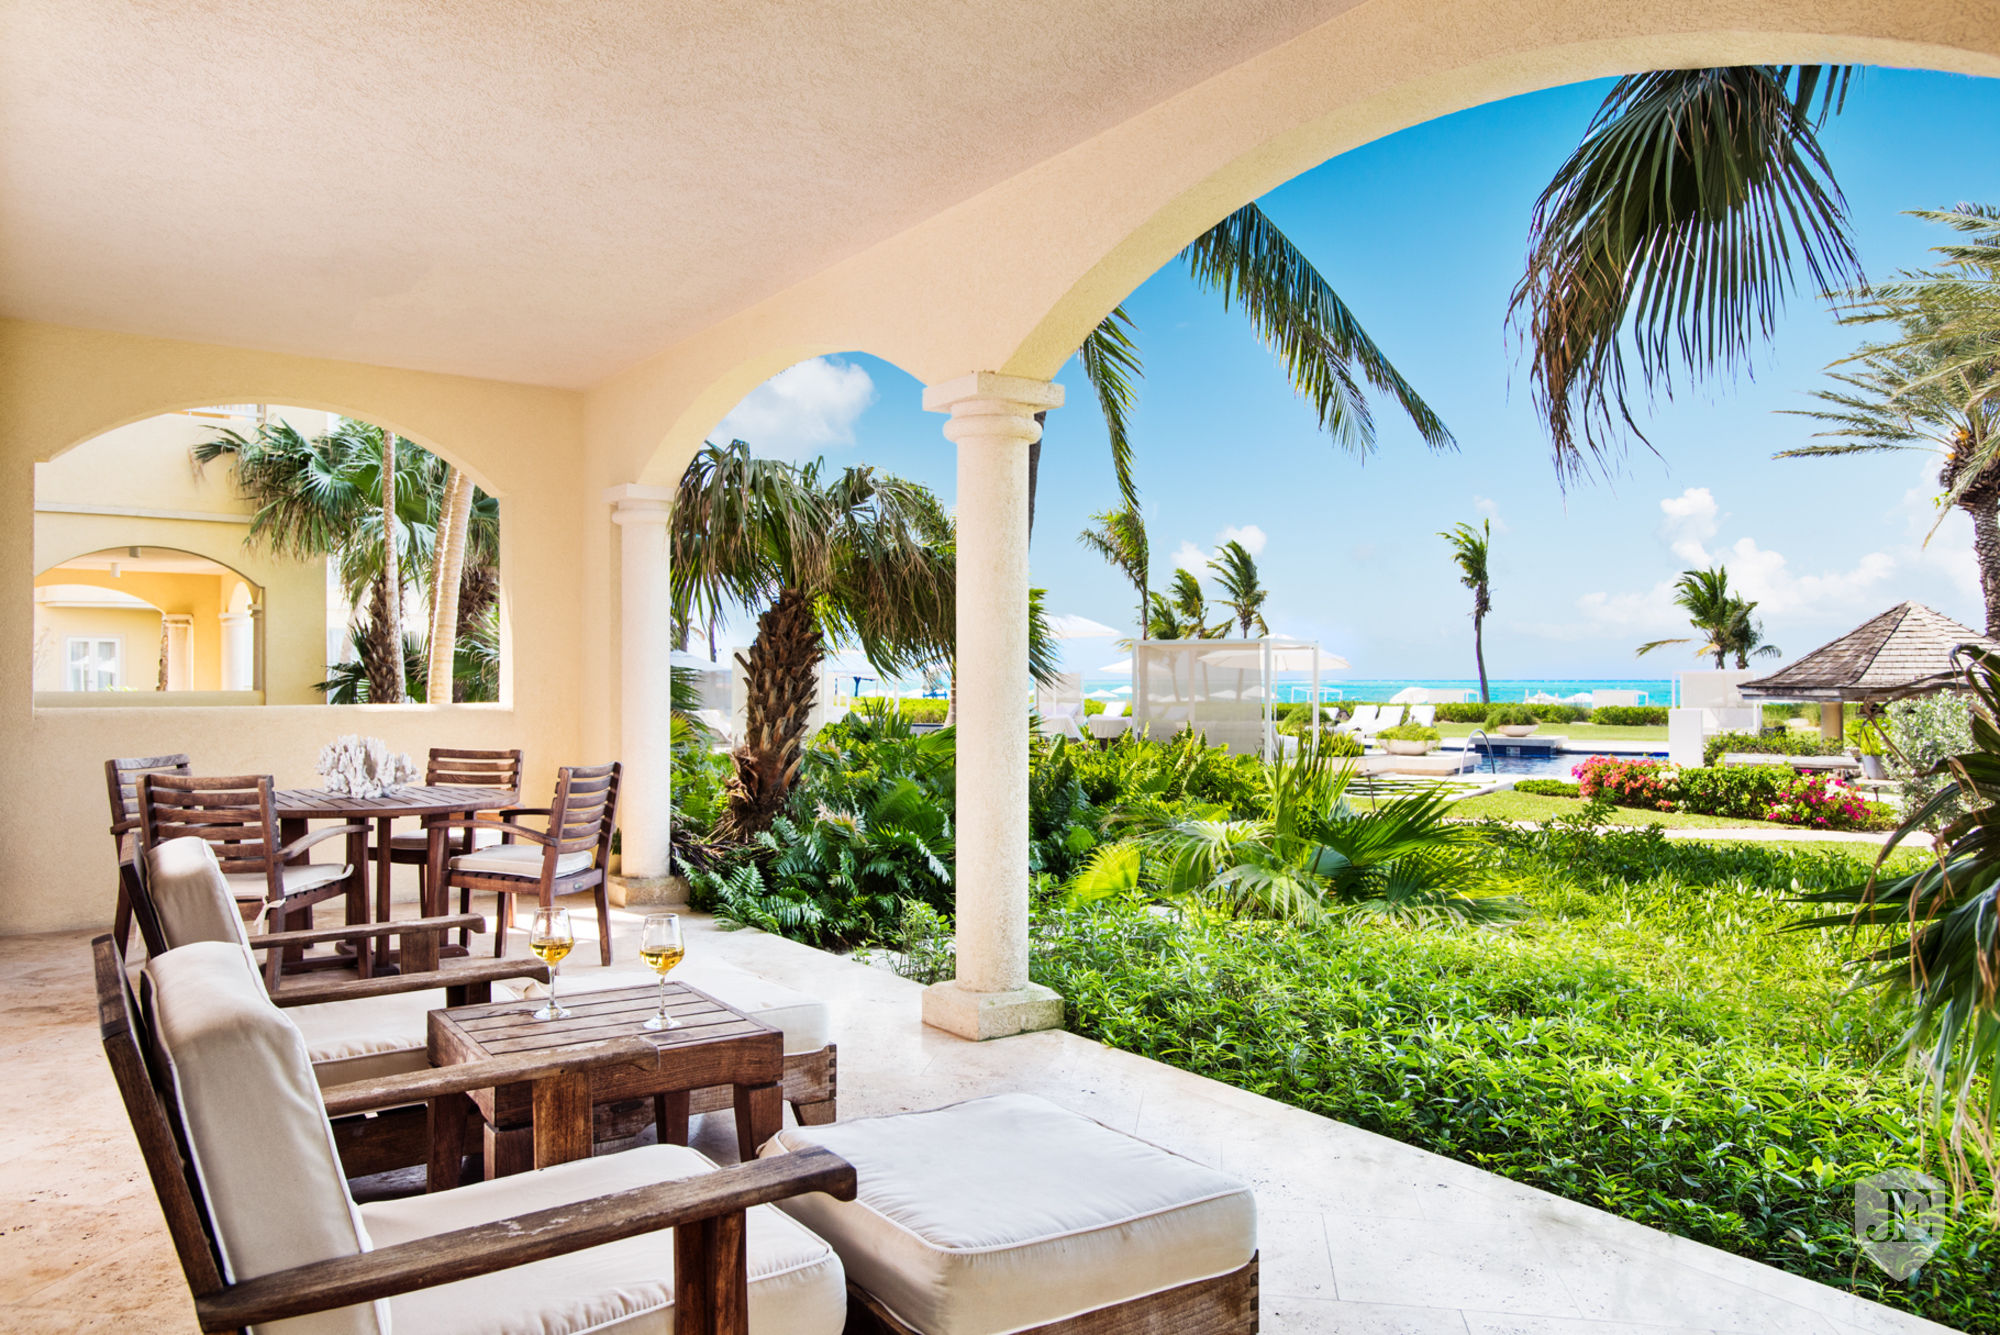 The Villas At Grace Bay Club D103.04 in Grace Bay Turks and Caicos ...